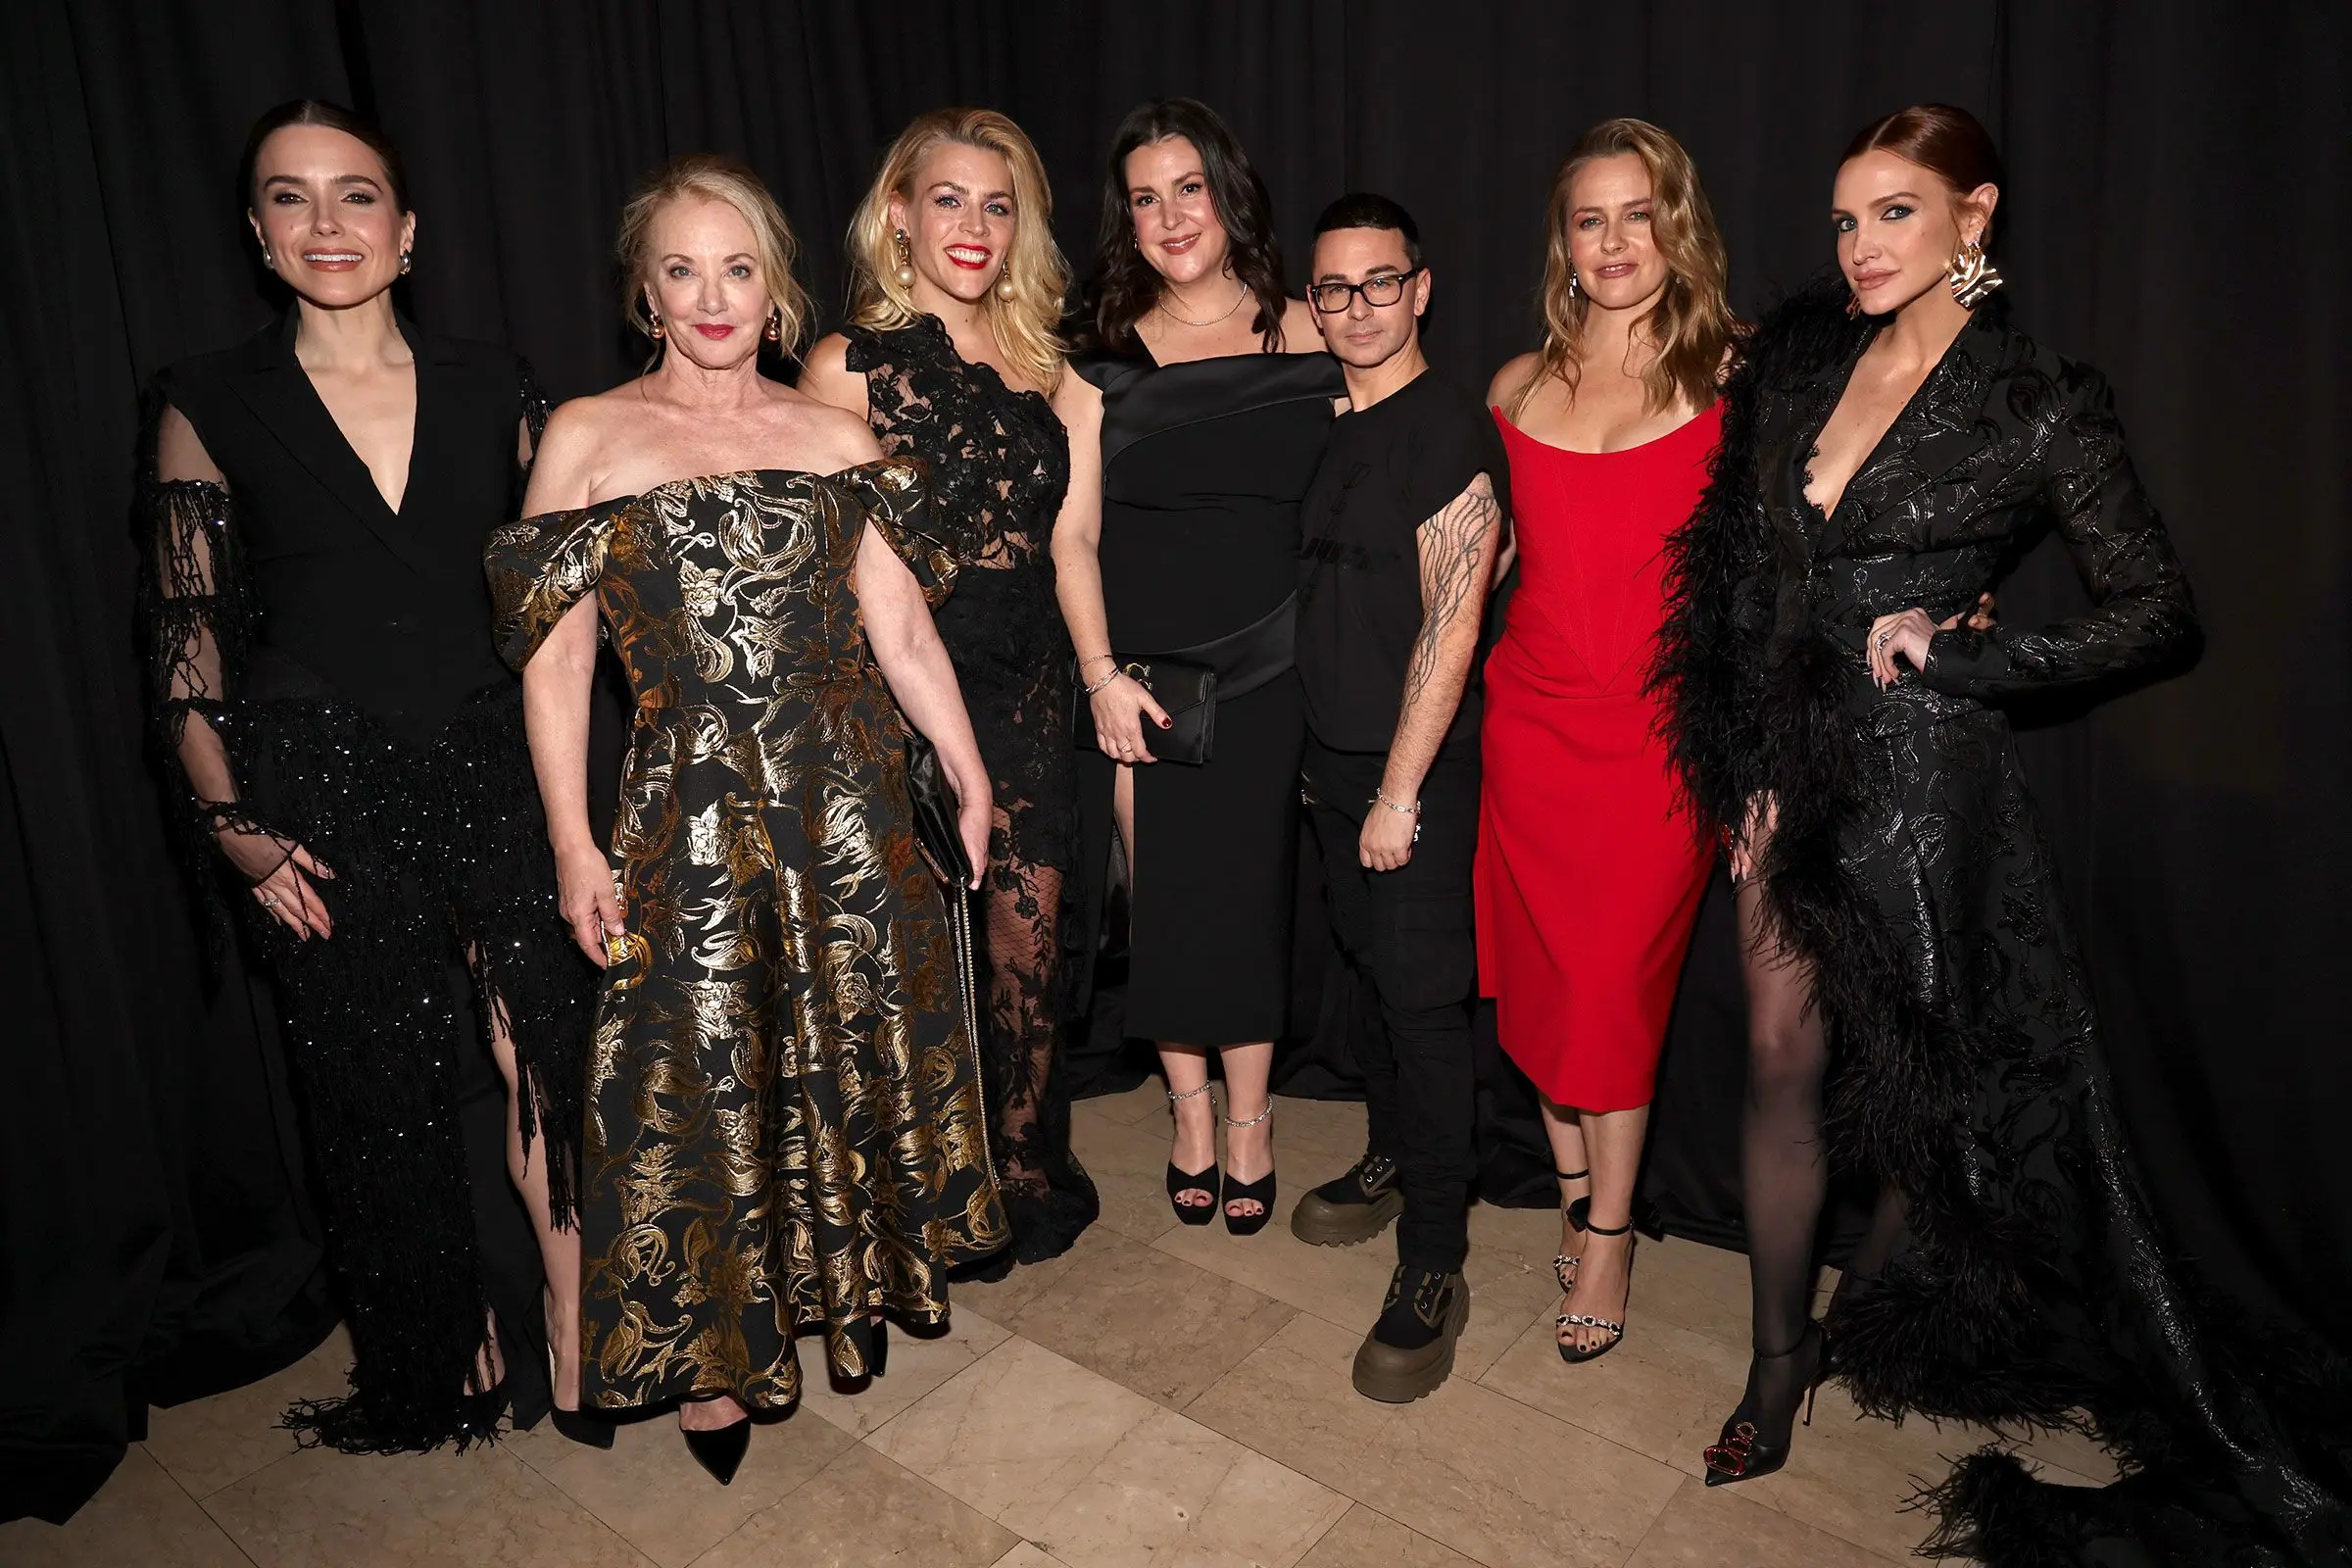 Sophia Bush, J. Smith-Cameron, Busy Philipps, Melanie Lynskey, Alicia Silverstone and Ashlee Simpson at The Plaza Hotel for Christian Siriano's (third from right) runway show on Thursday evening.